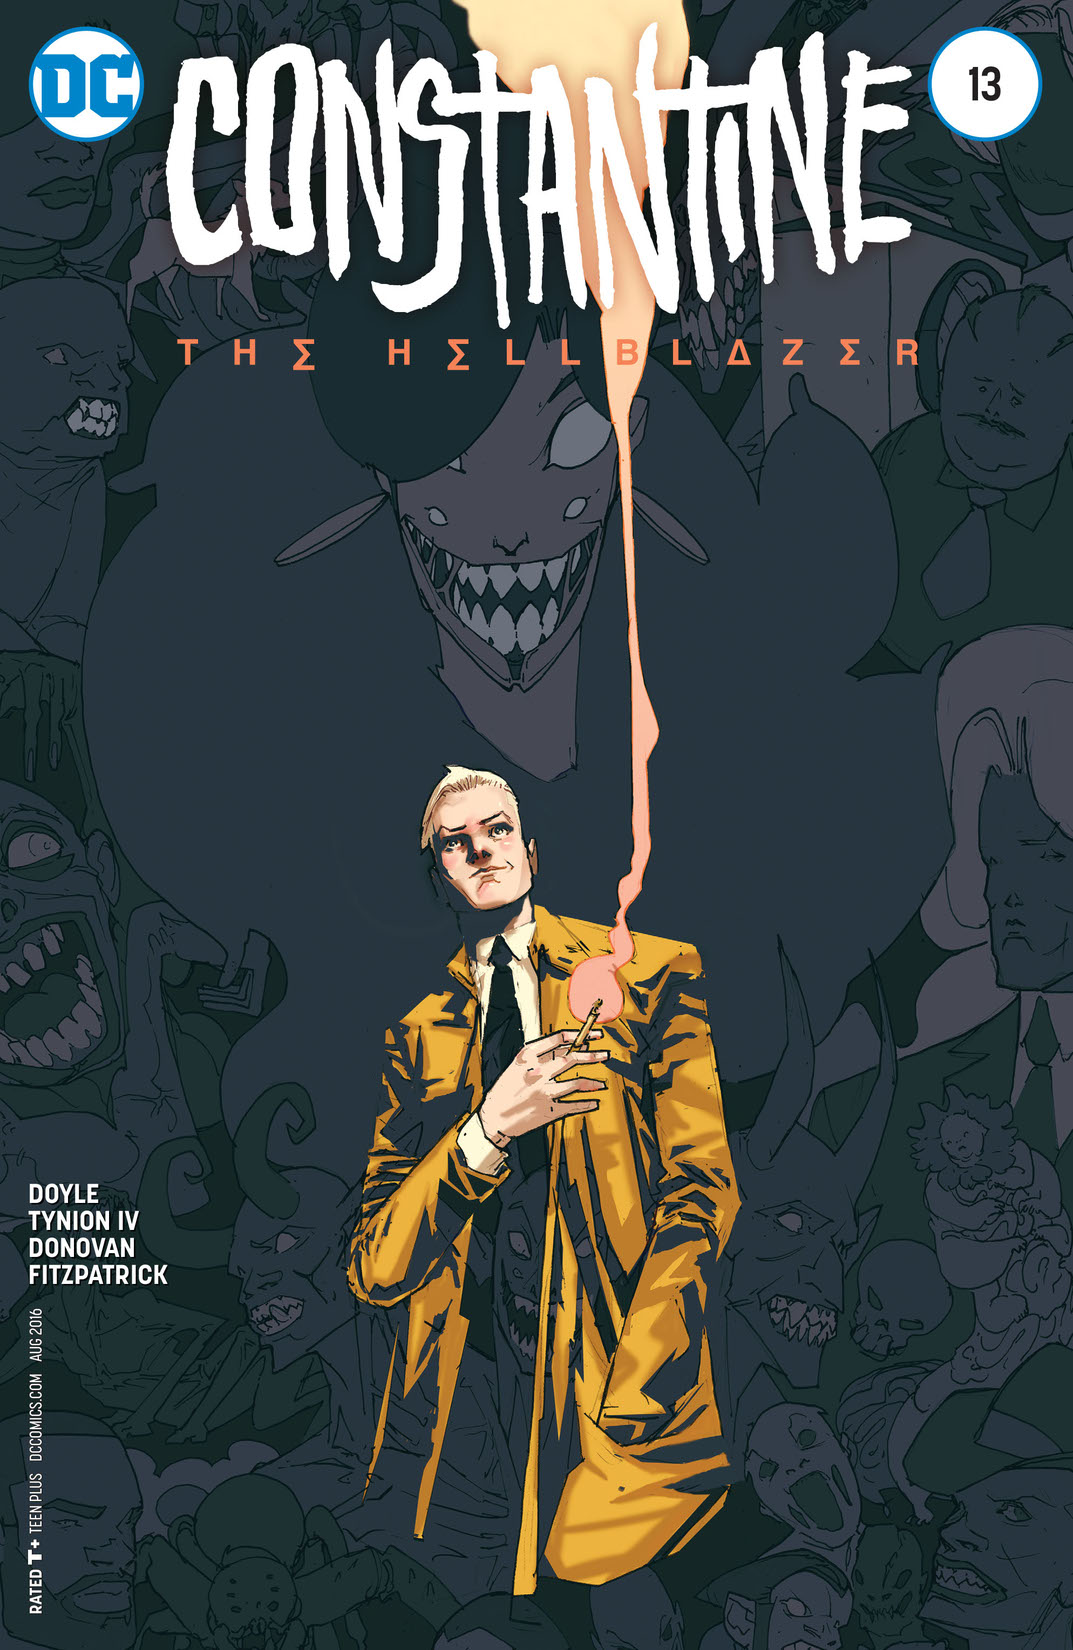 Constantine: The Hellblazer #13 preview images